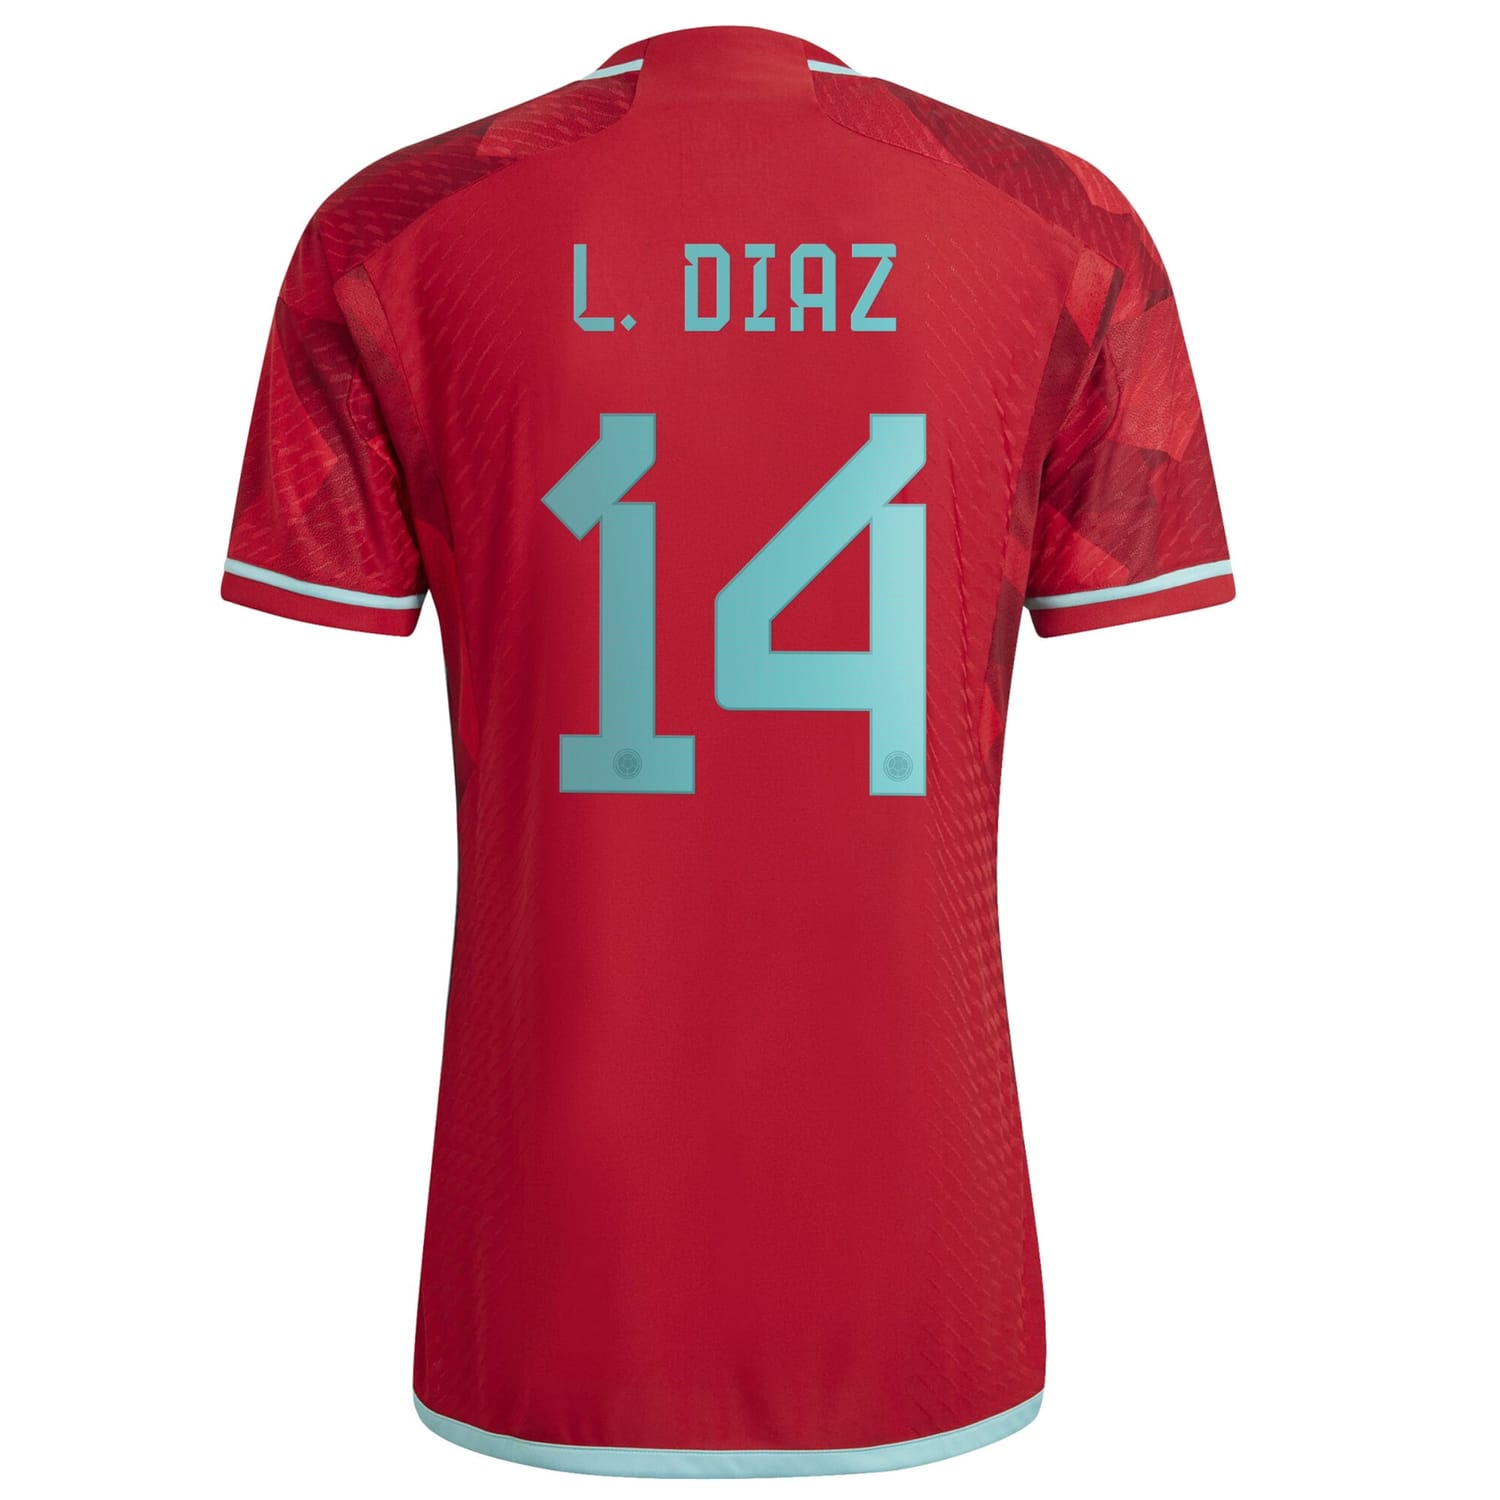 Colombia National Team Away Authentic Jersey Shirt Red 2022-23 player Luis Diaz printing for Men